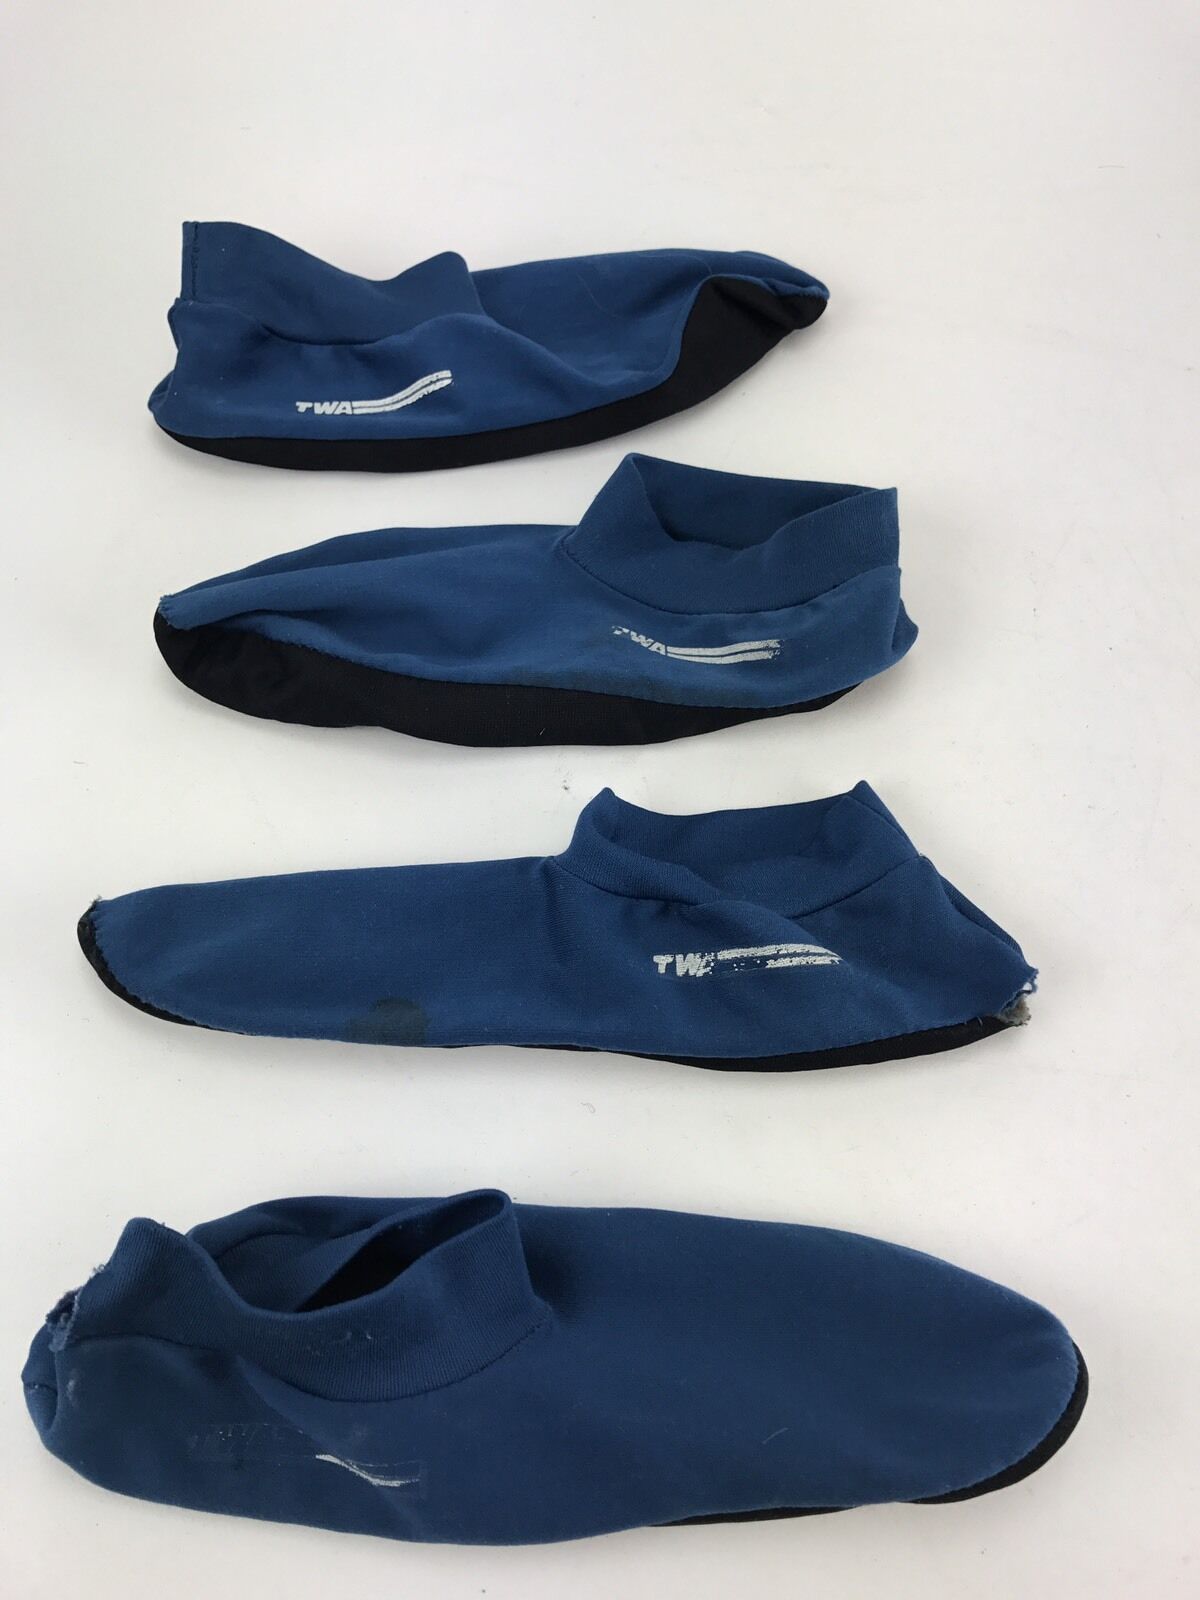 Vintage TWA Airlines First Class Booties Slipper Set Of 4 Fast 